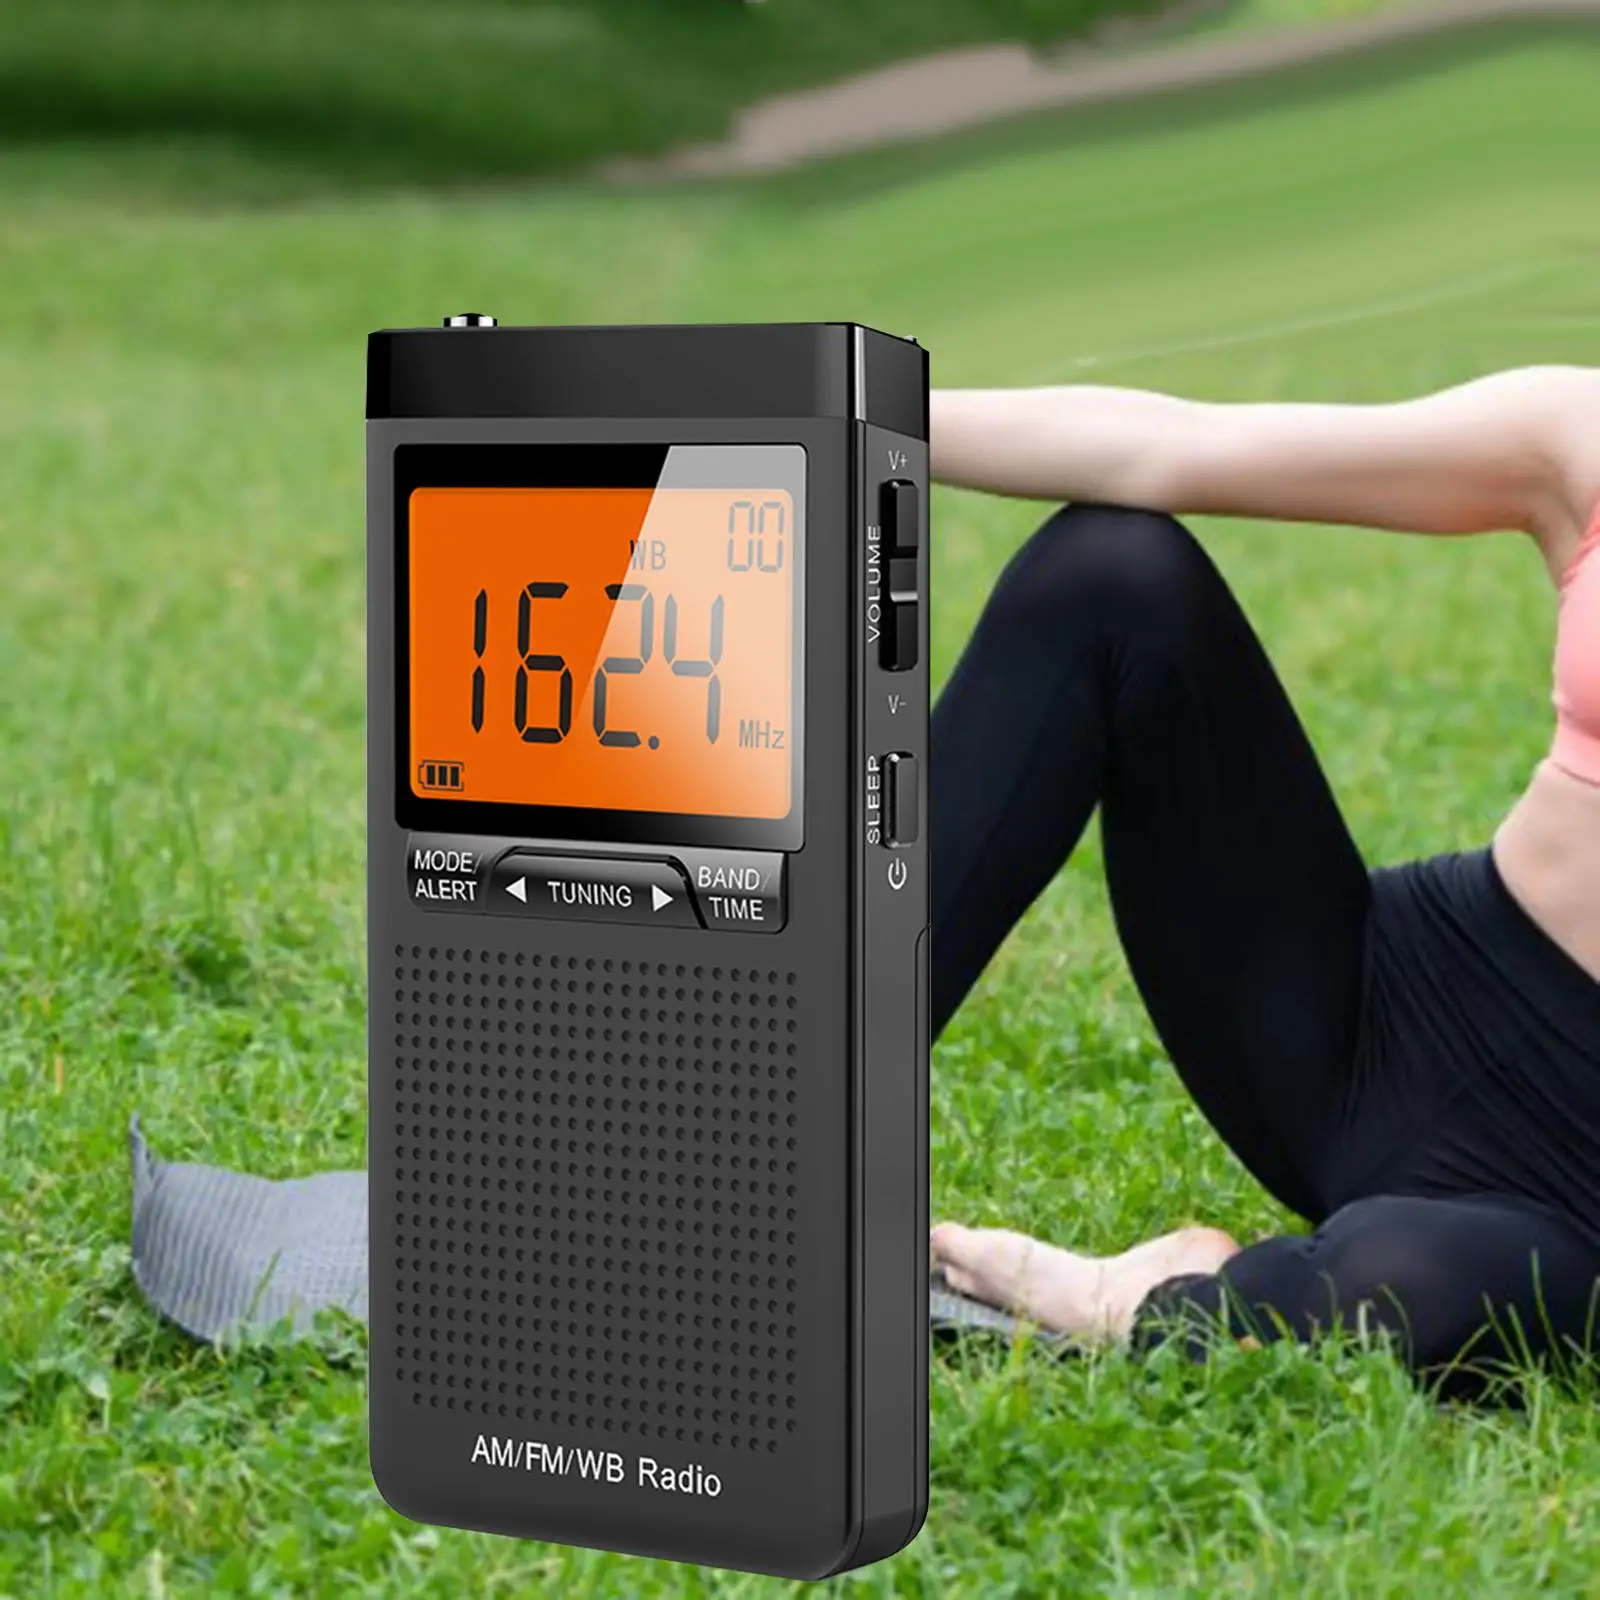 Portable Radio AM FM with Headphone Jack Stereo Good Reception Mini Personal Radio for Walking Indoor Outdoor Jogging Travel Gym